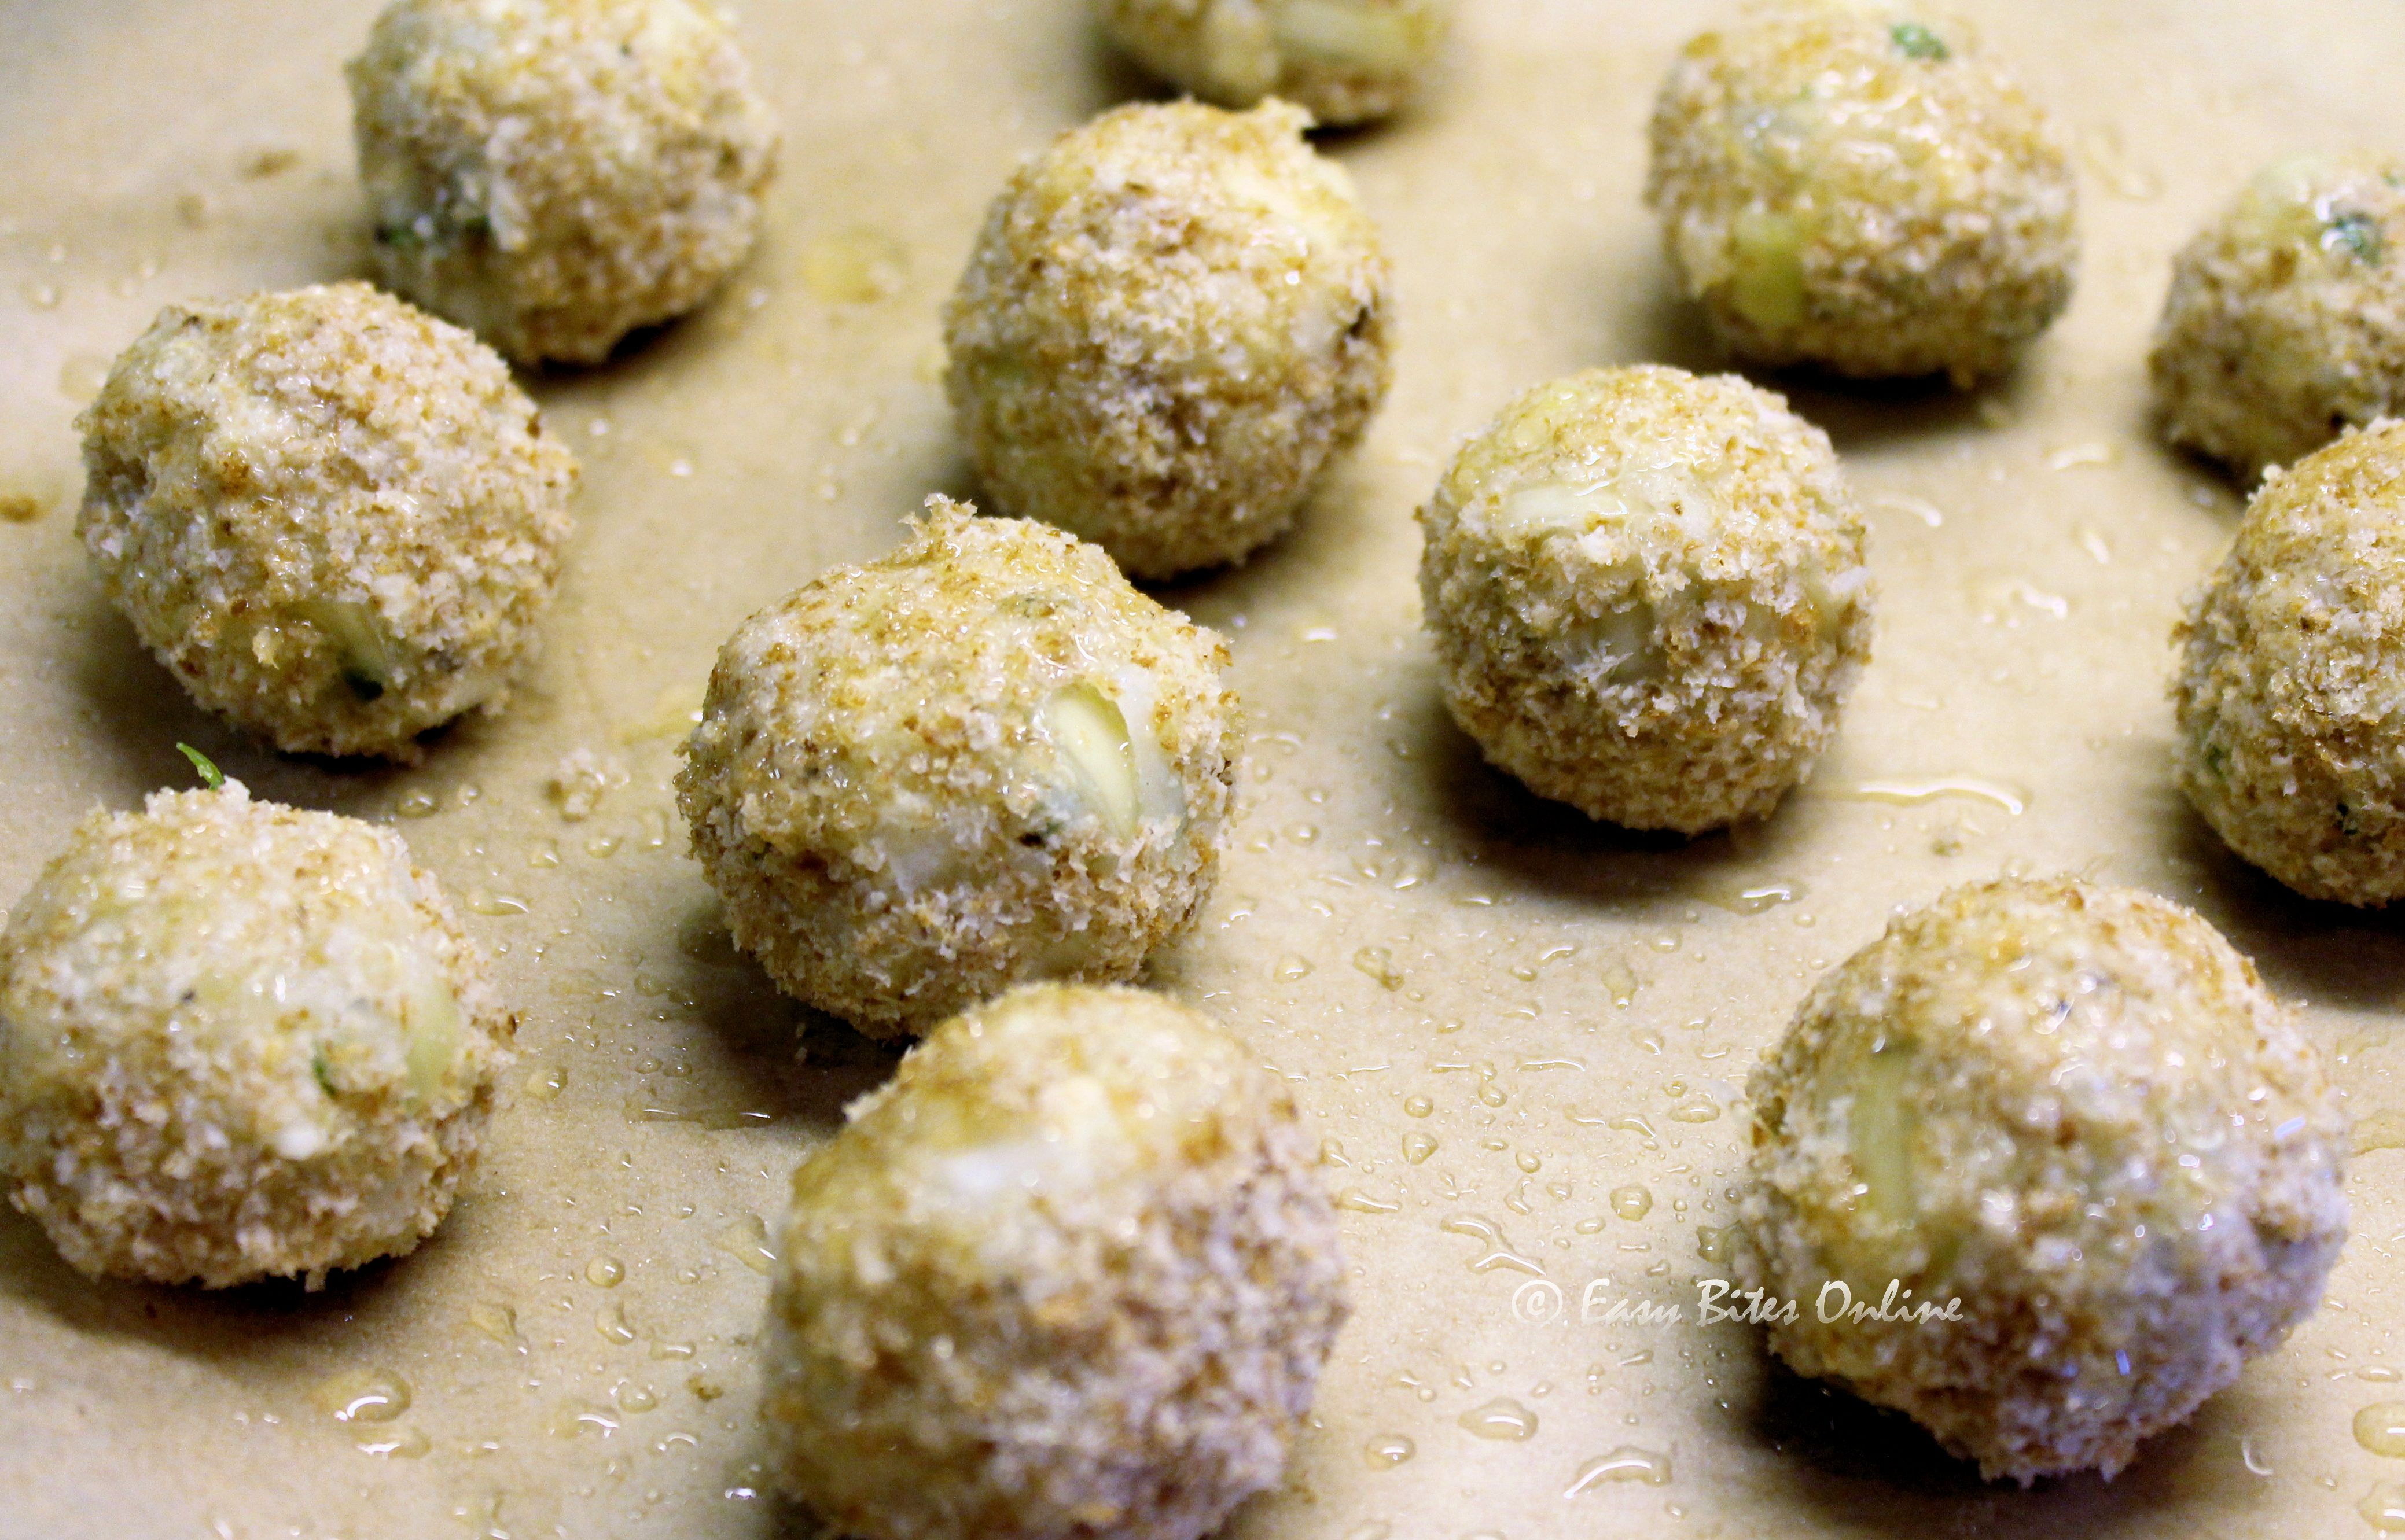 place the prepared balls over lined greased baking tray, bake at 190 deg C until golden